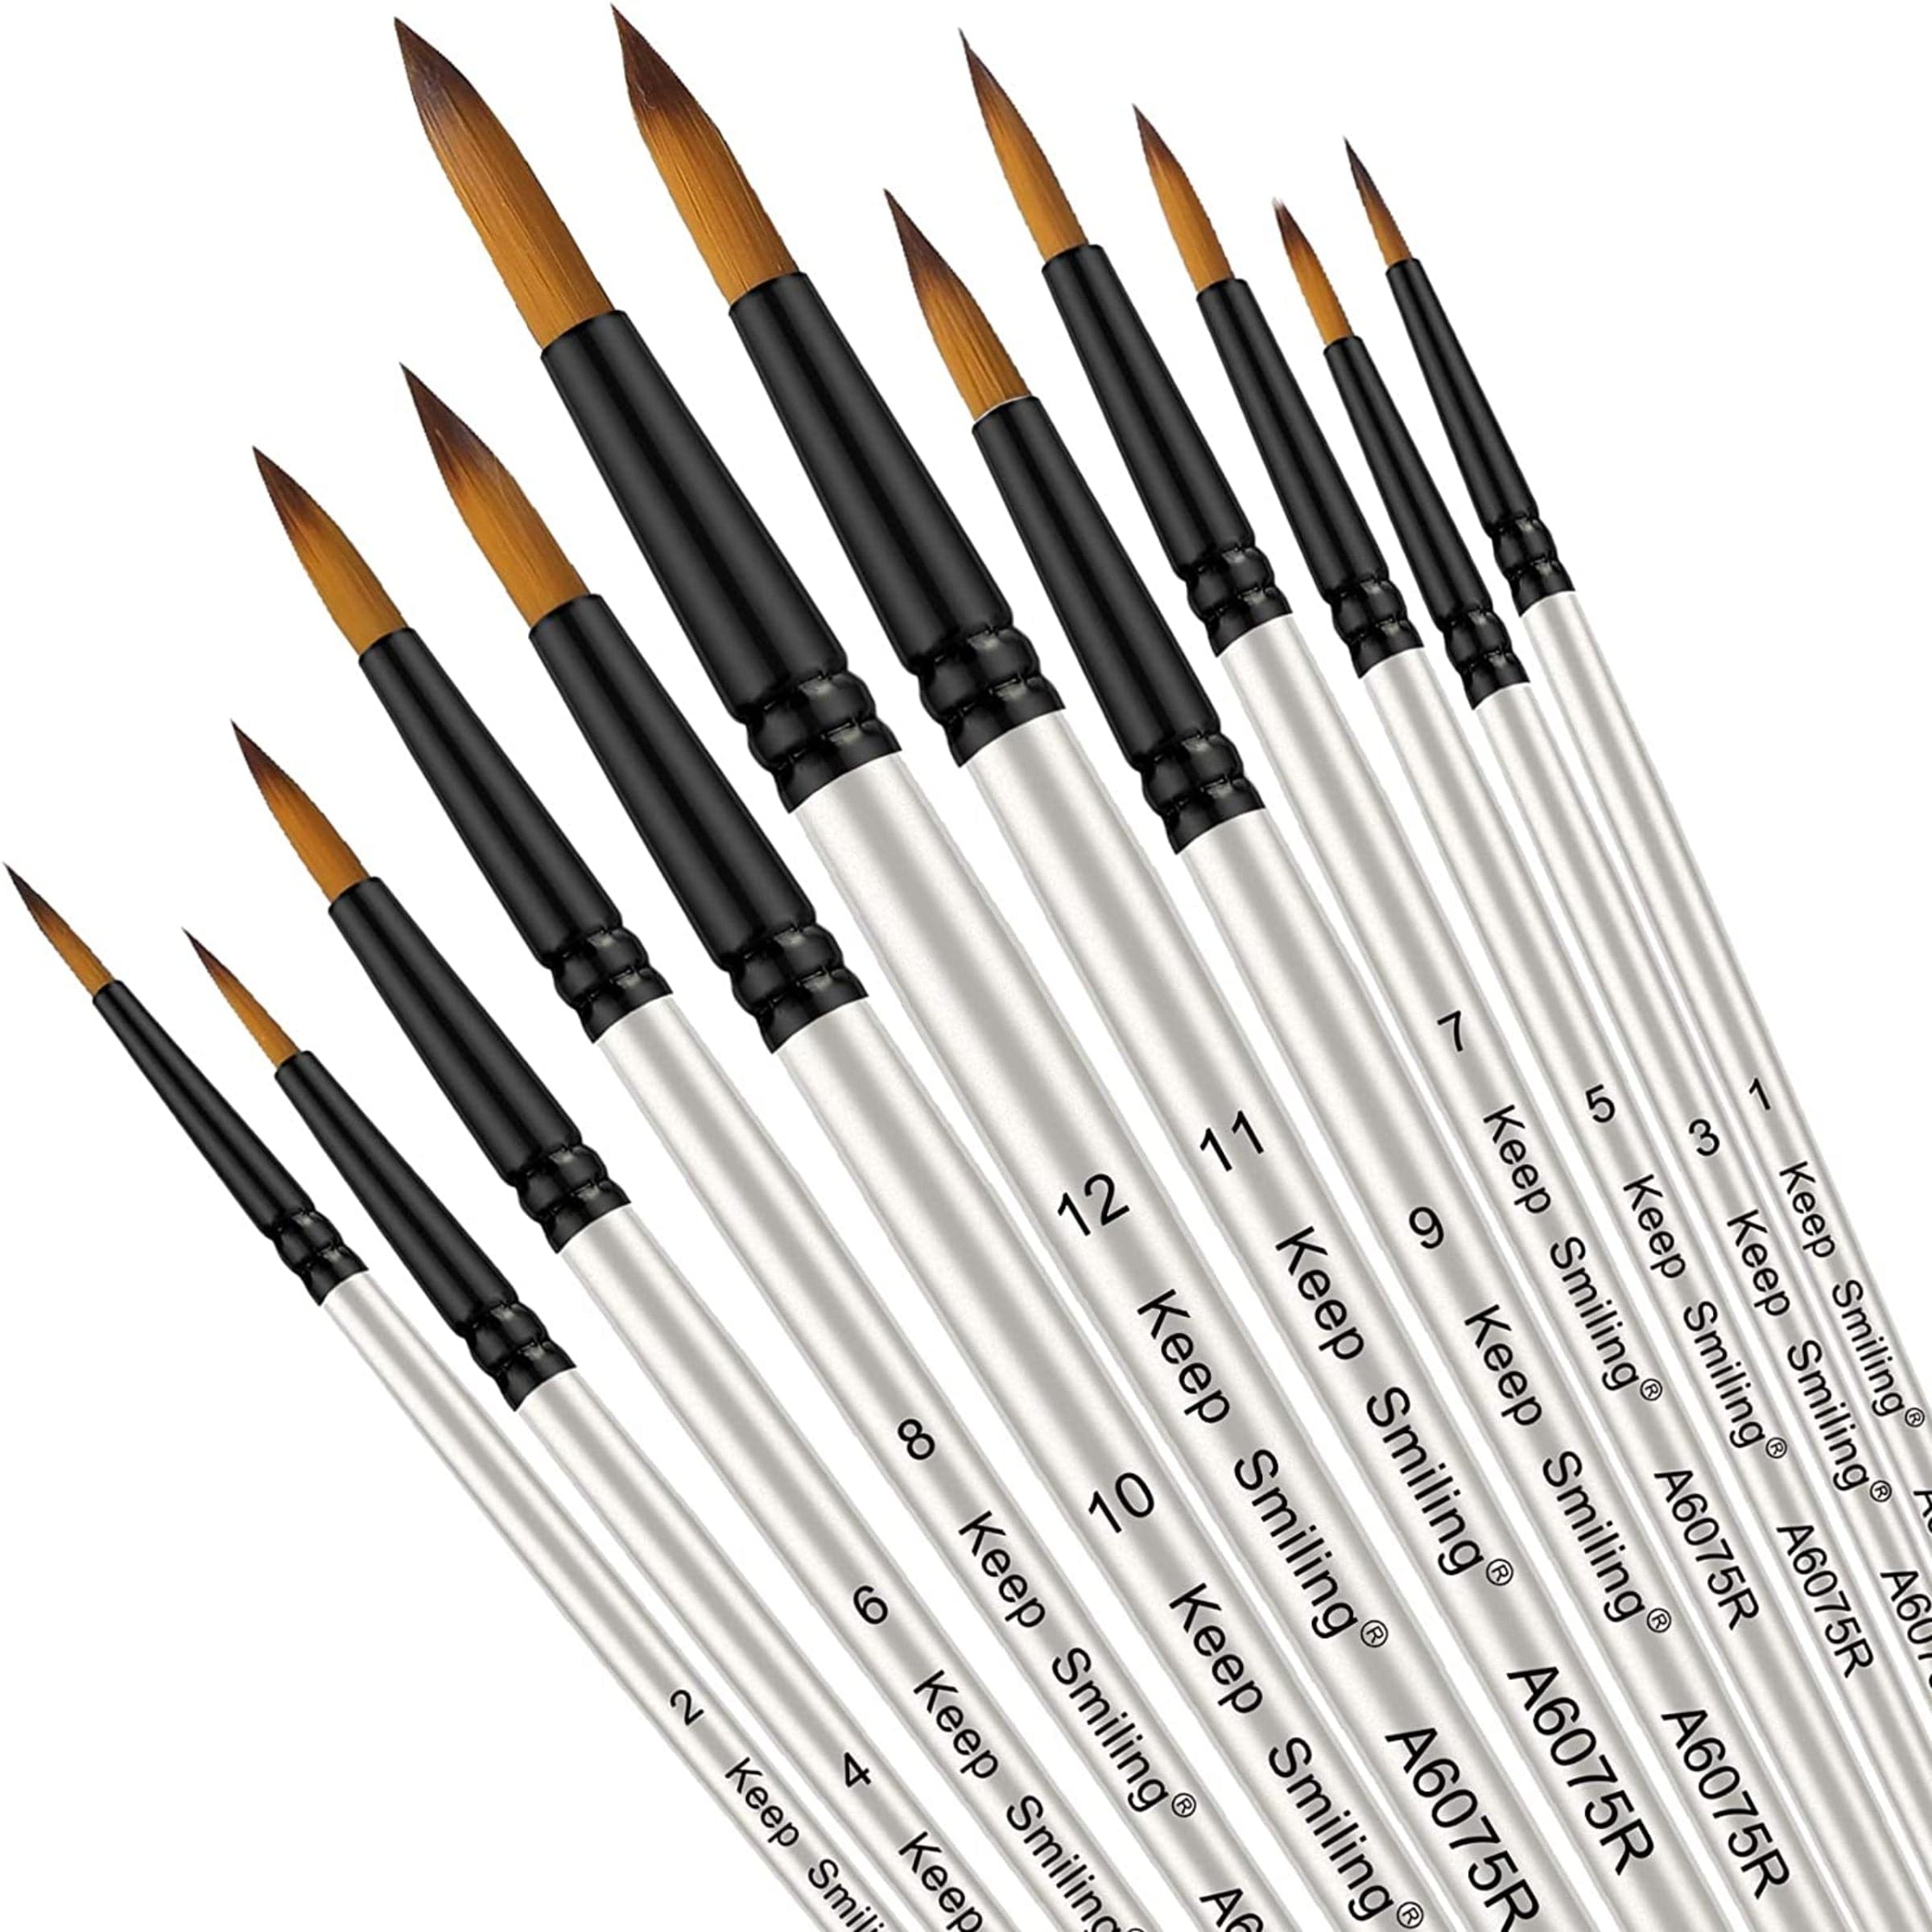 Keep Smiling Professional Round Tip Paint Brush Pack of 12